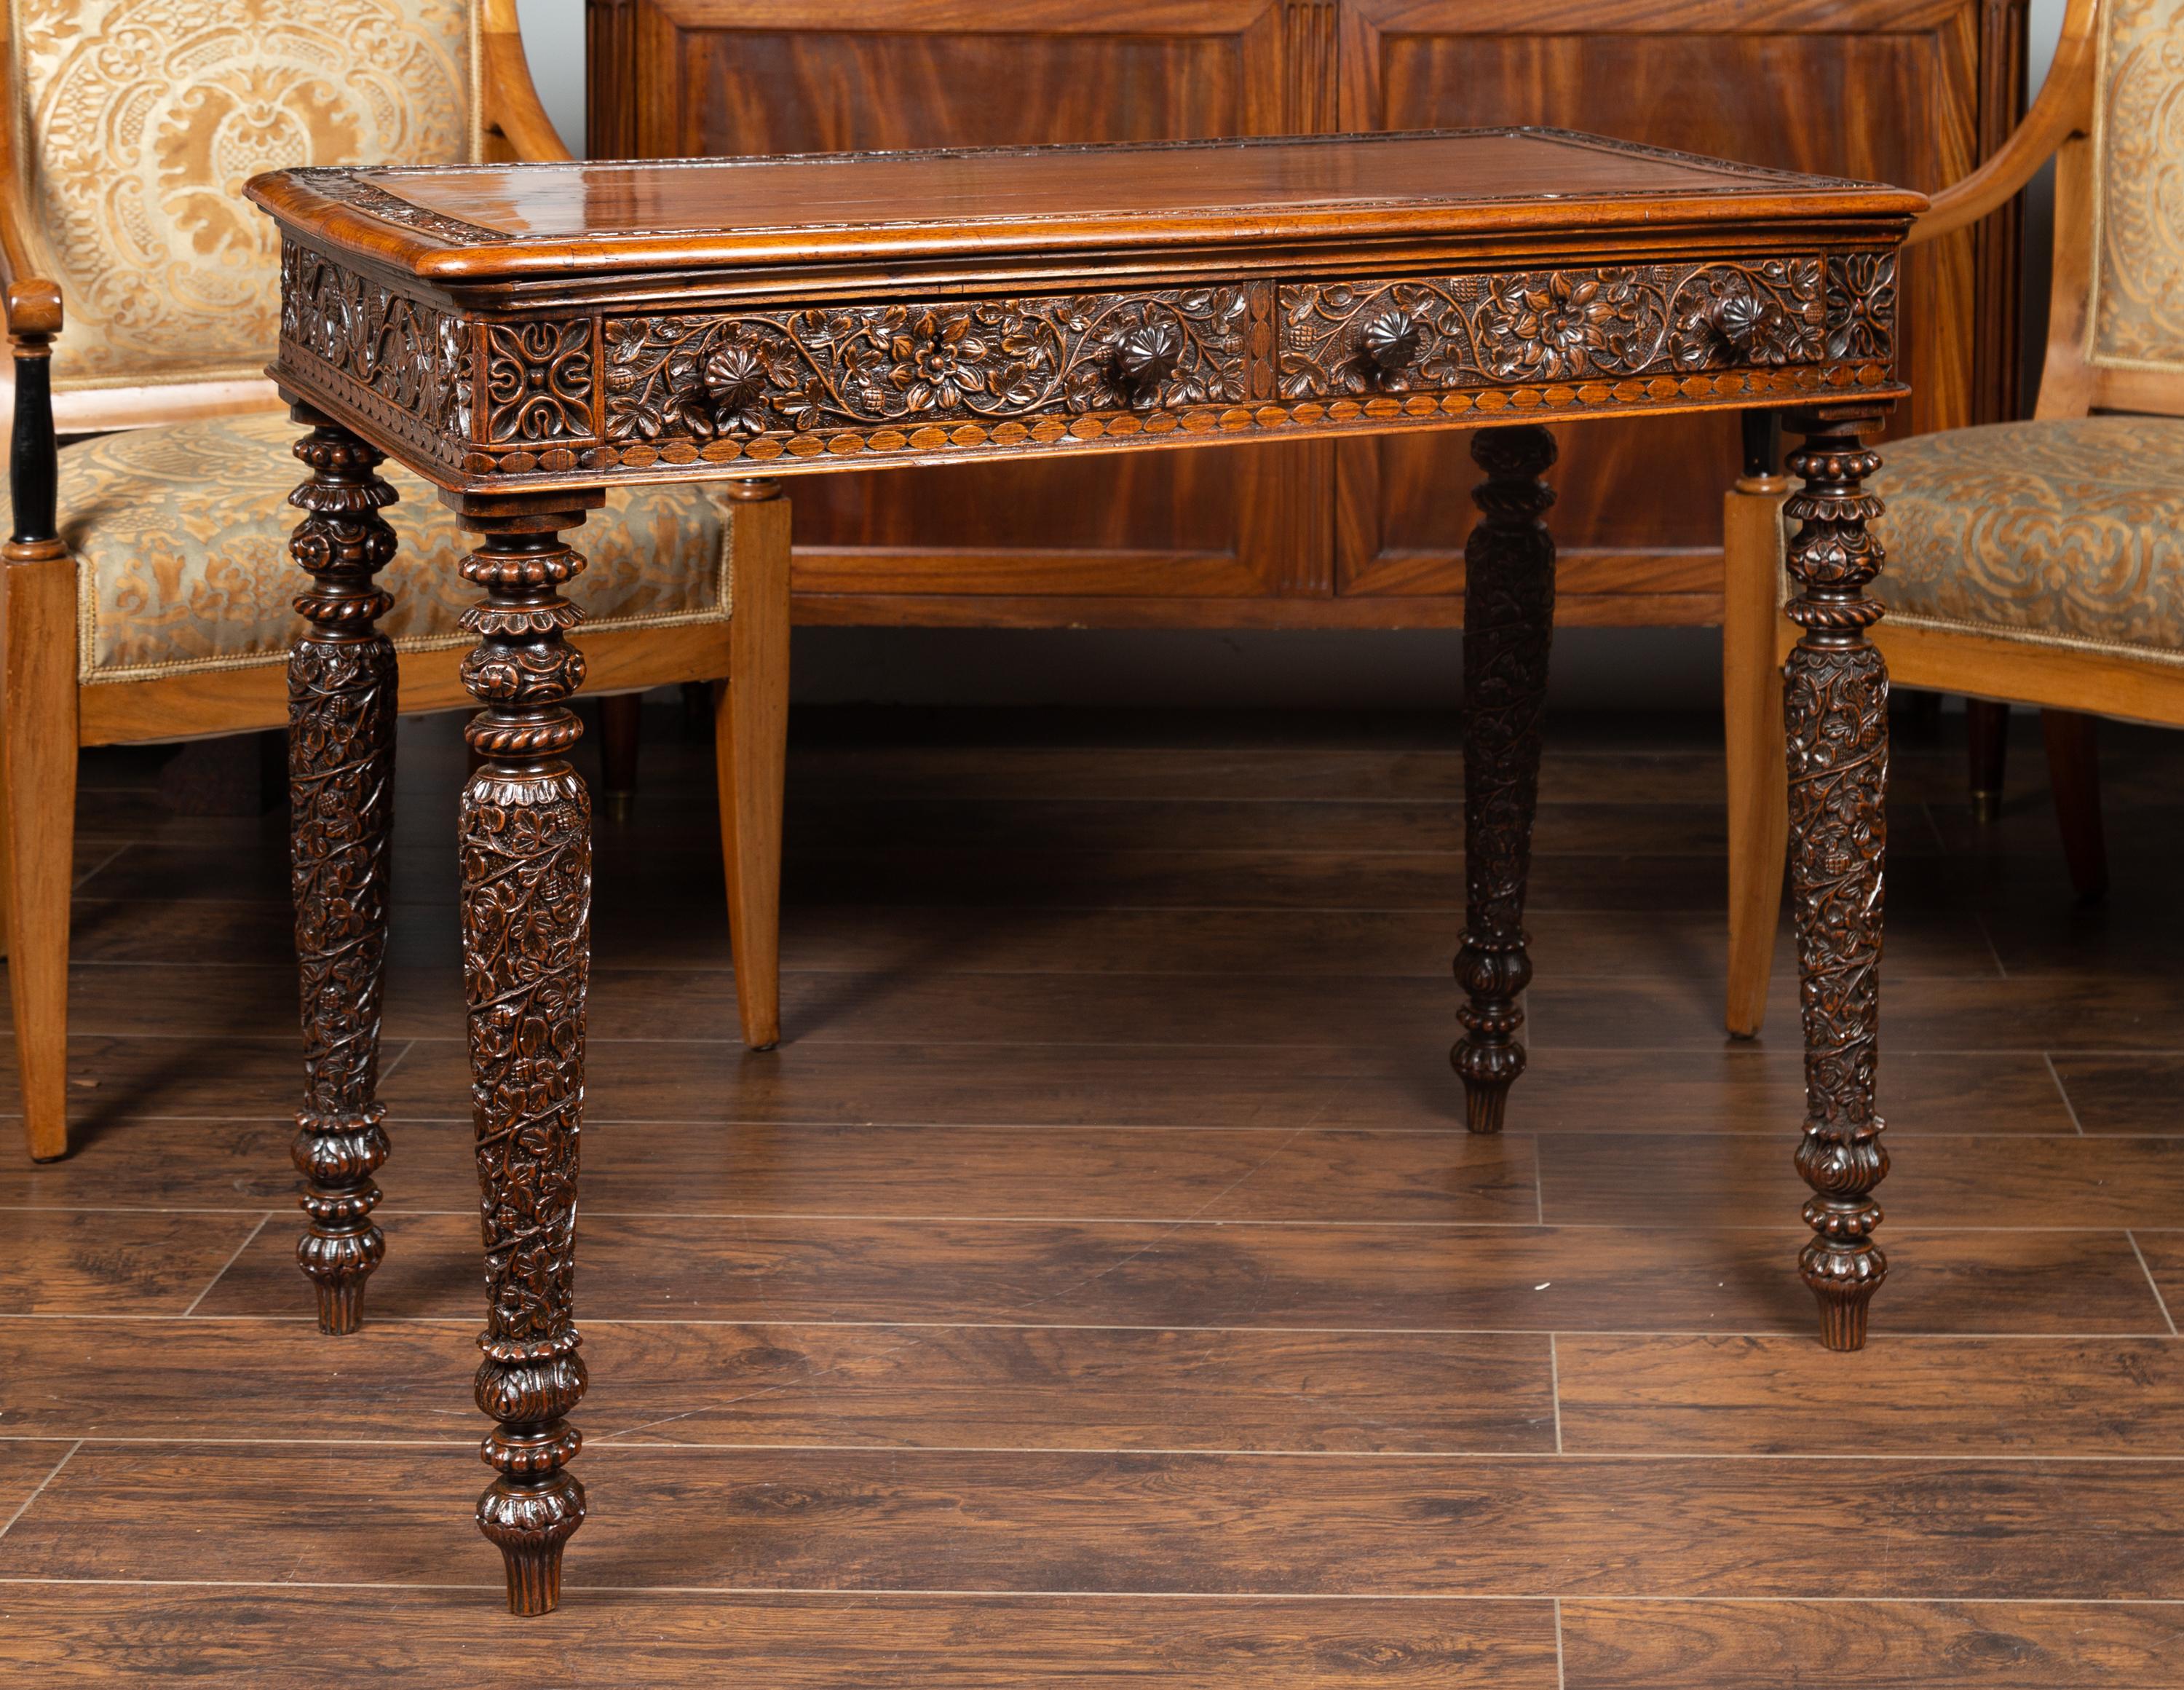 20th Century Foliage Carved 1900s Anglo-Indian Table with Two Drawers and Turned Legs